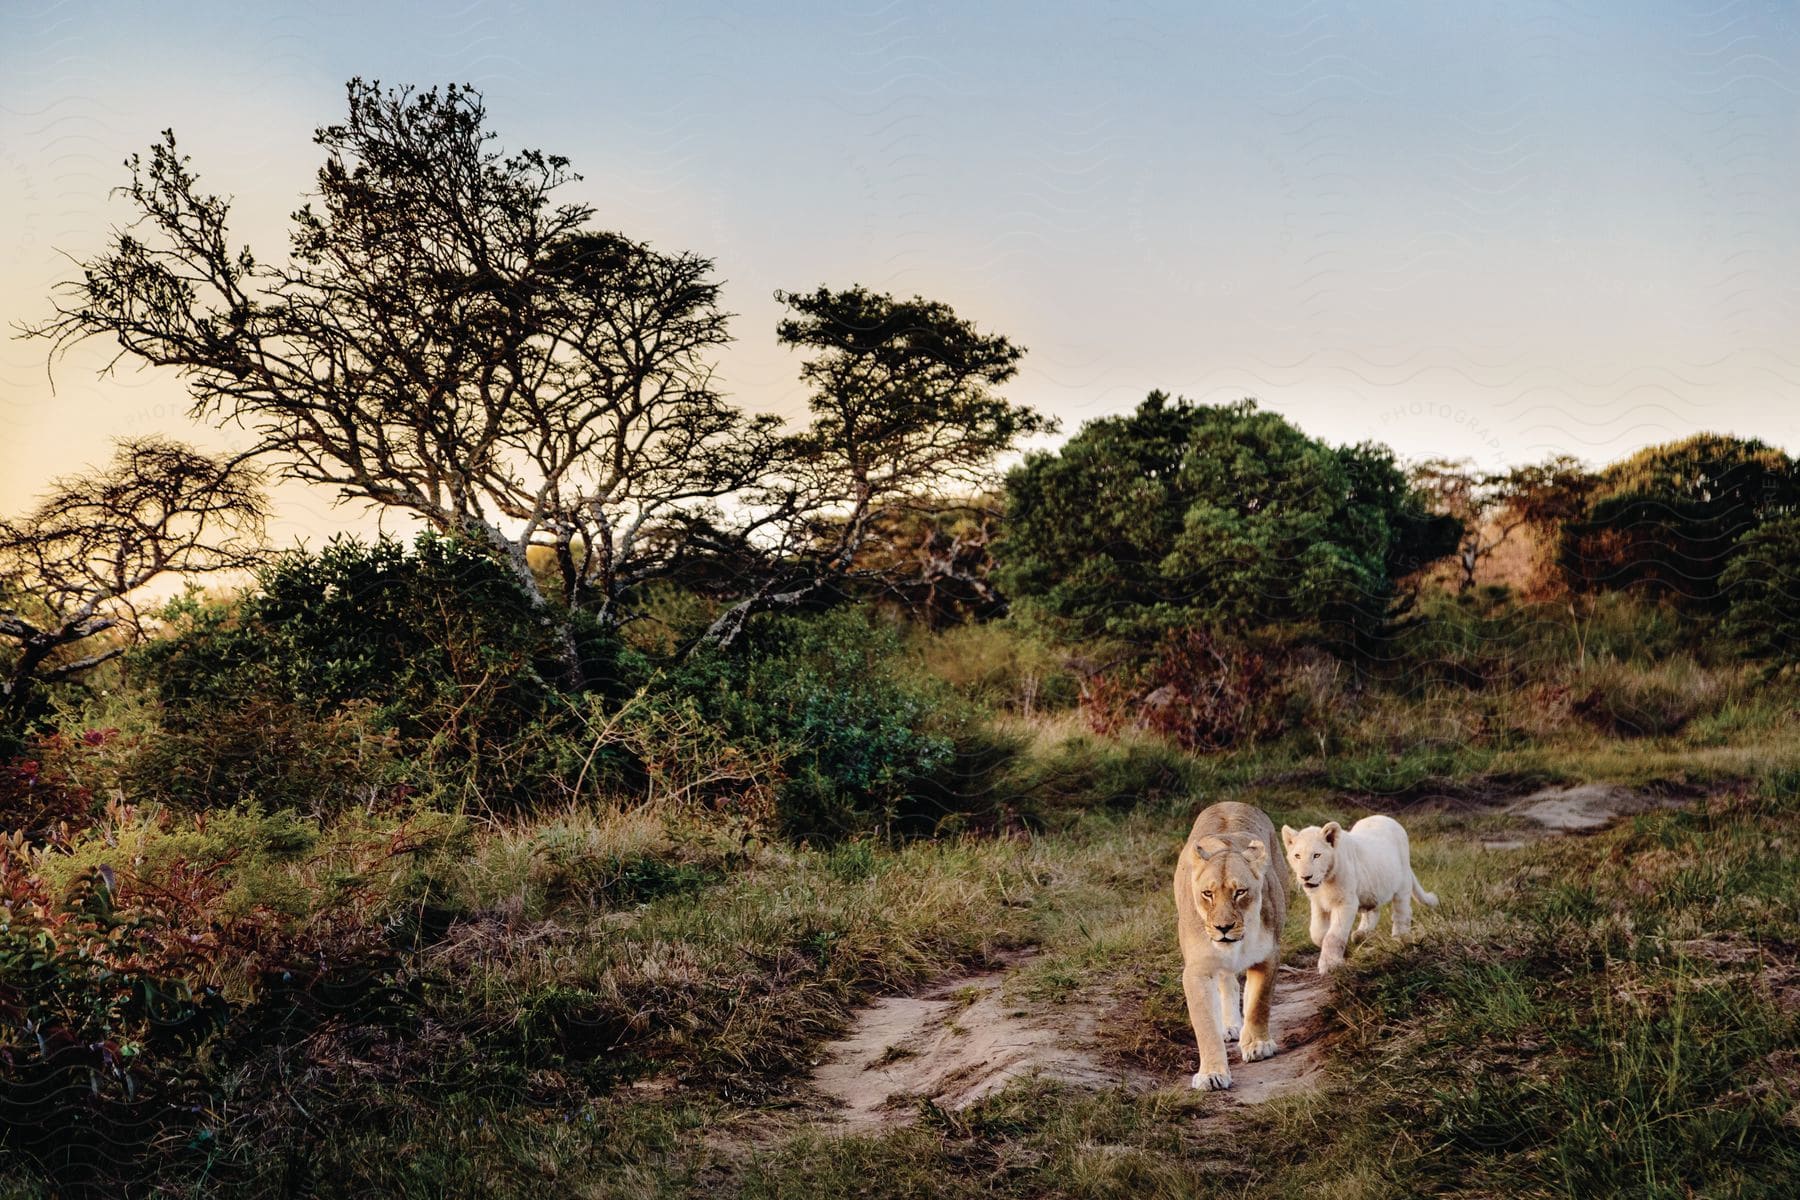 A lioness and her cub walk through the savanna near some trees